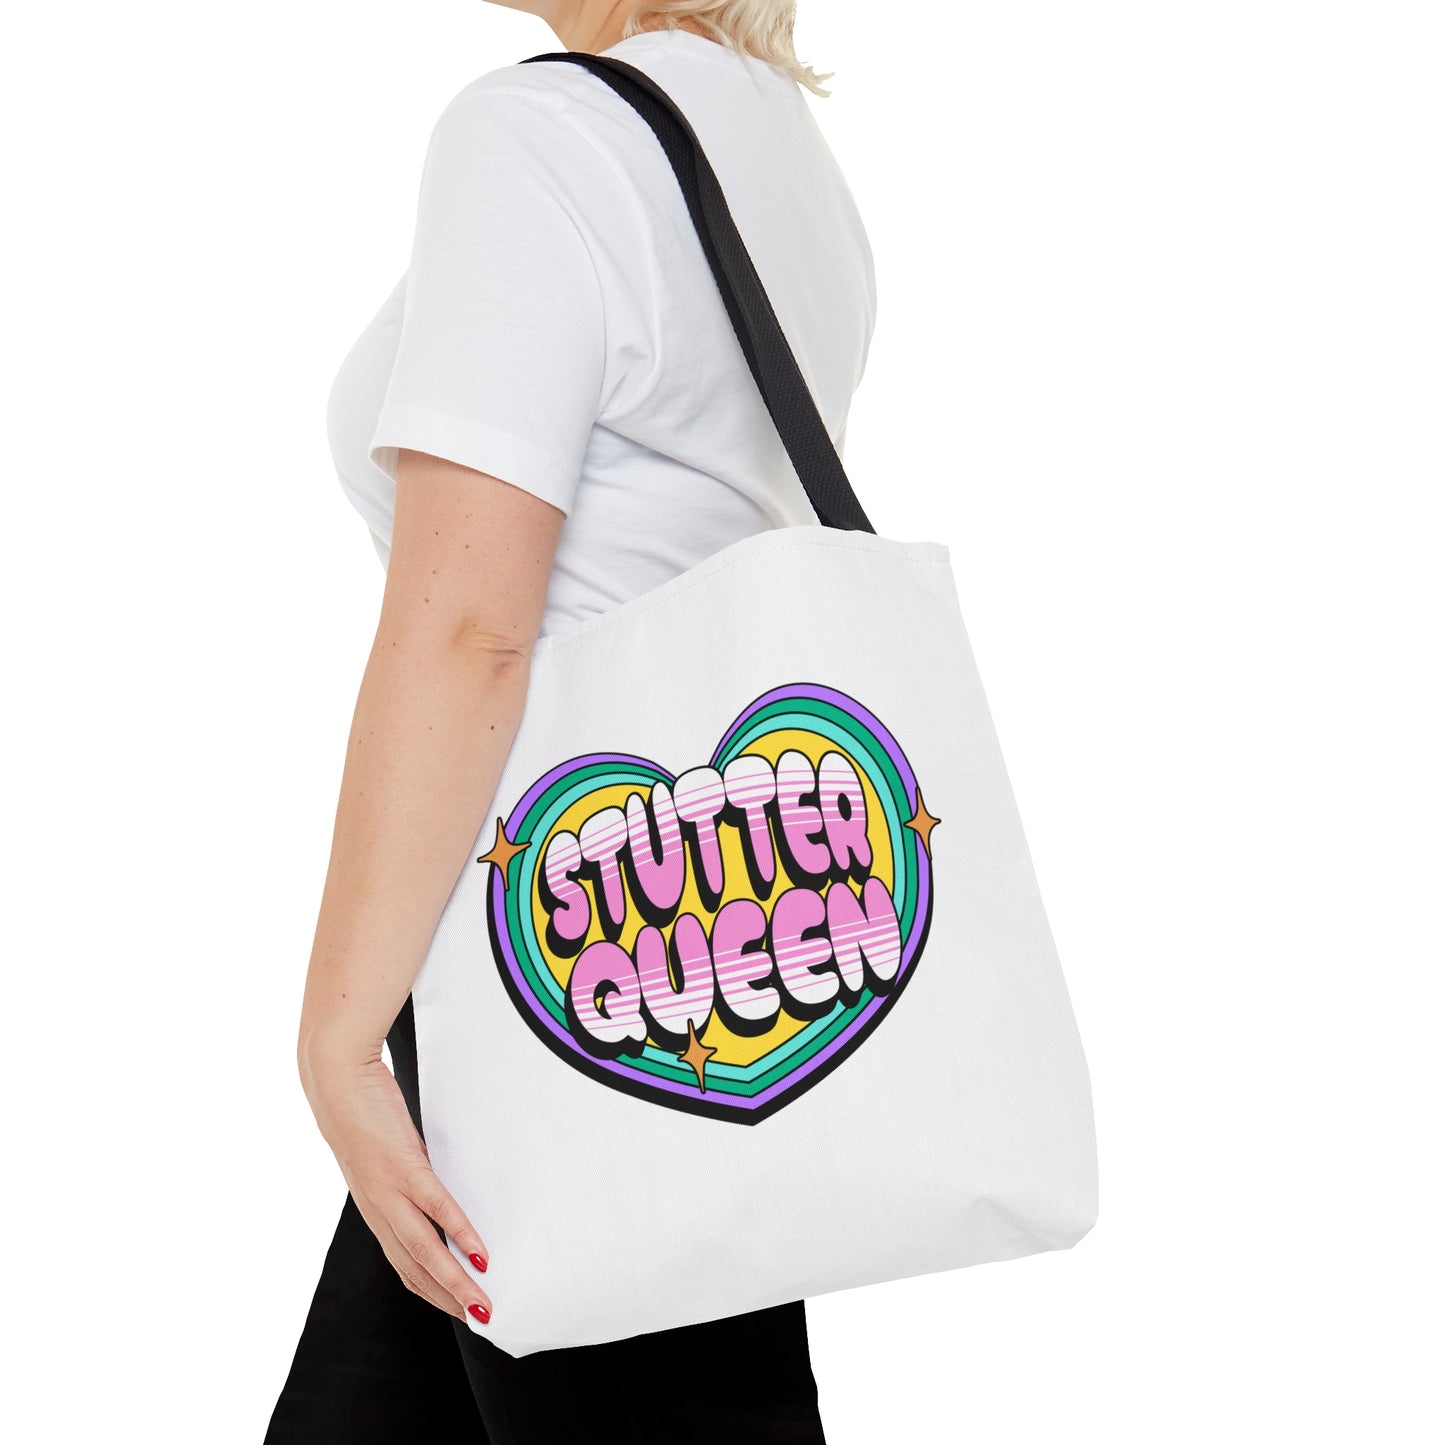 Stuttering Queen Cute Heart Tote Bag Gift for Woman Who Stutters